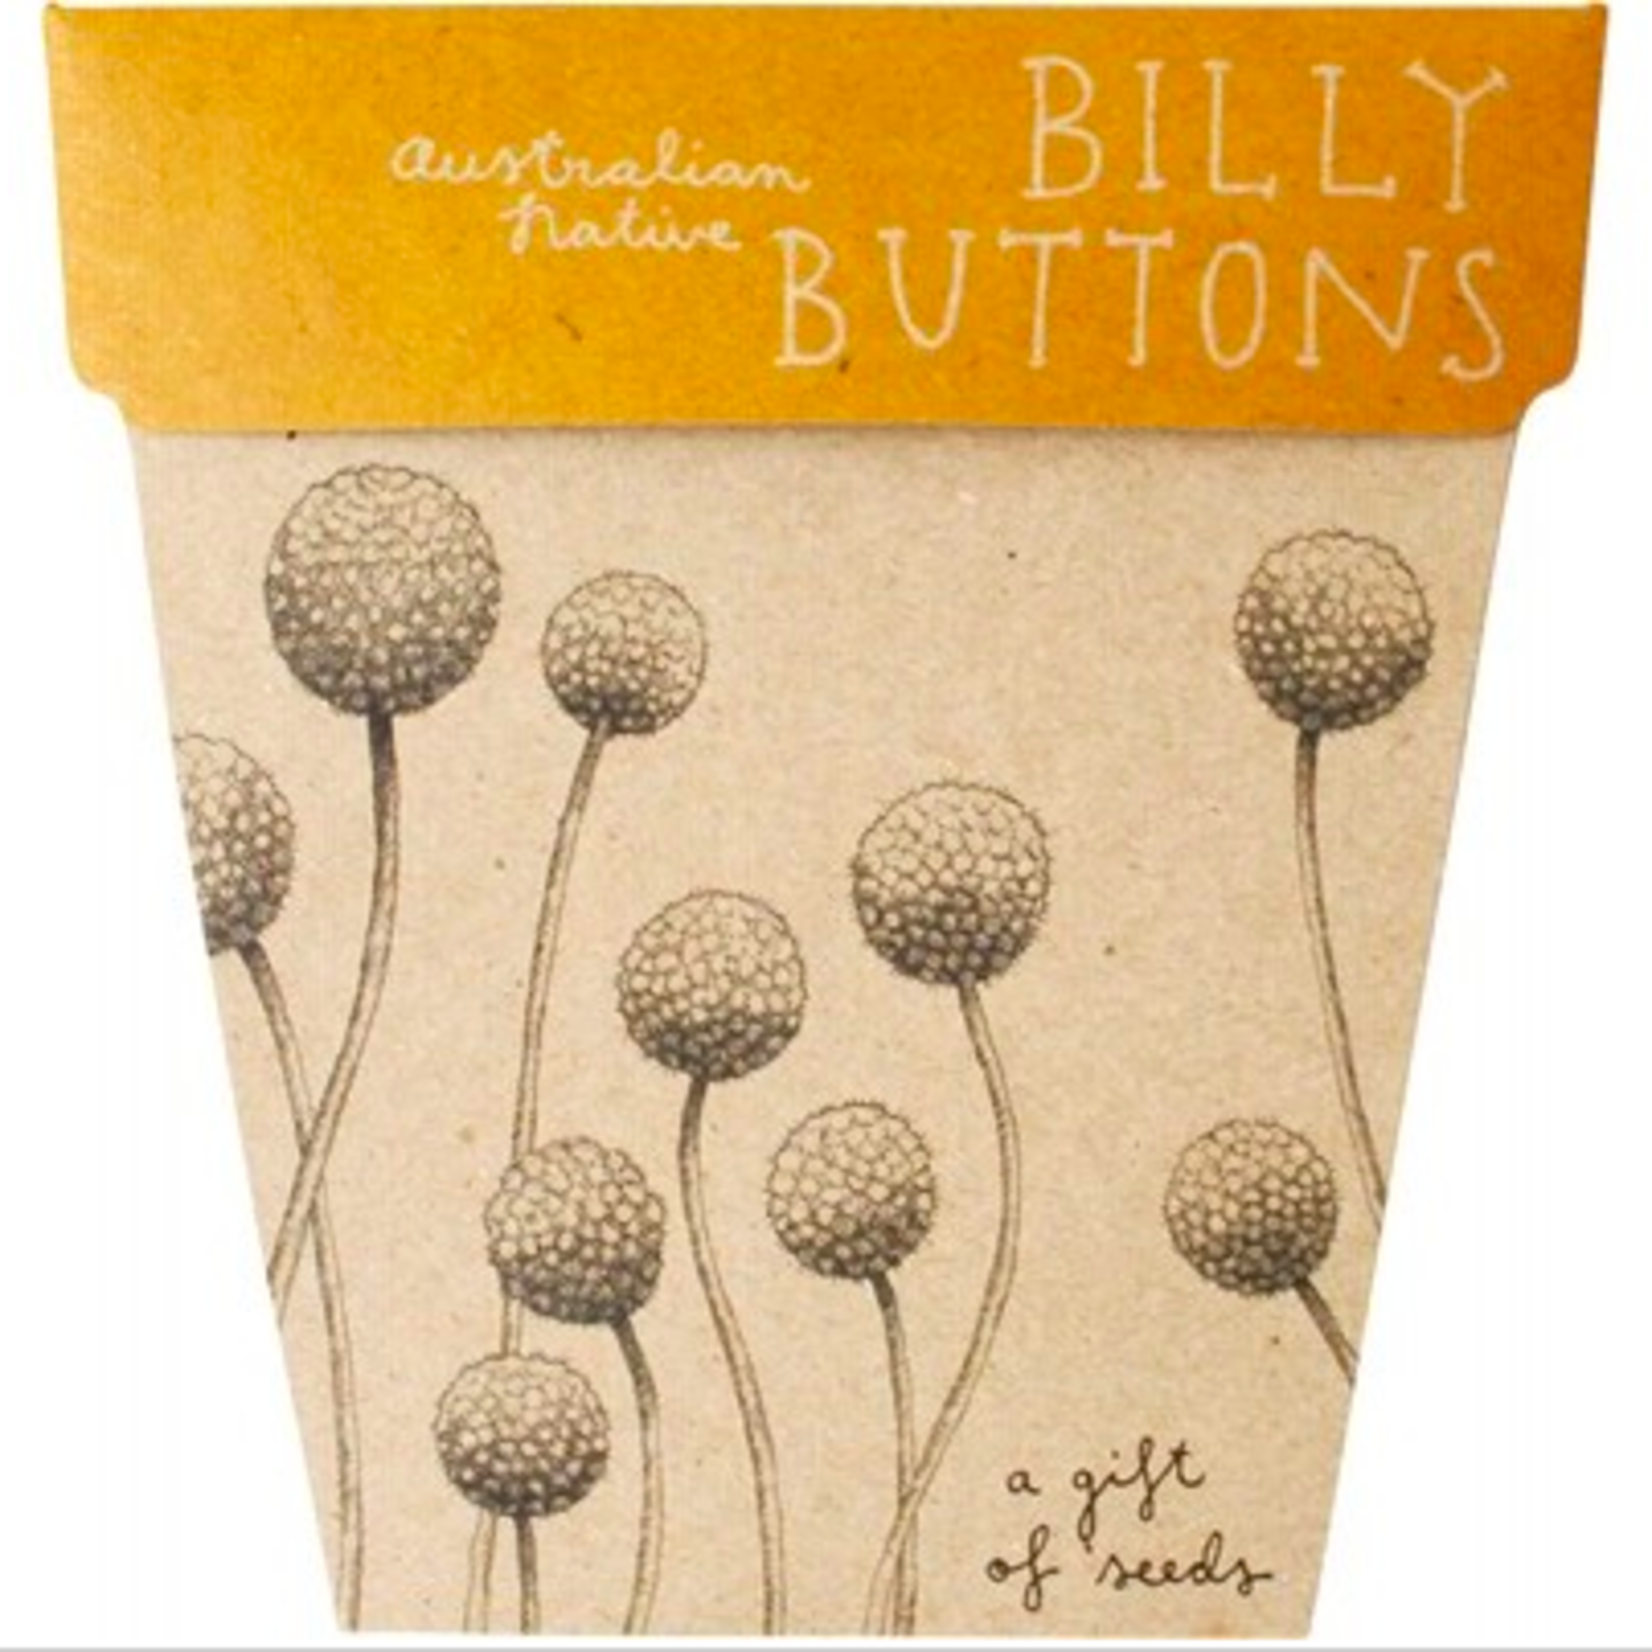 Sow 'n Sow Sow 'N Sow Gift of Seeds Billy Buttons